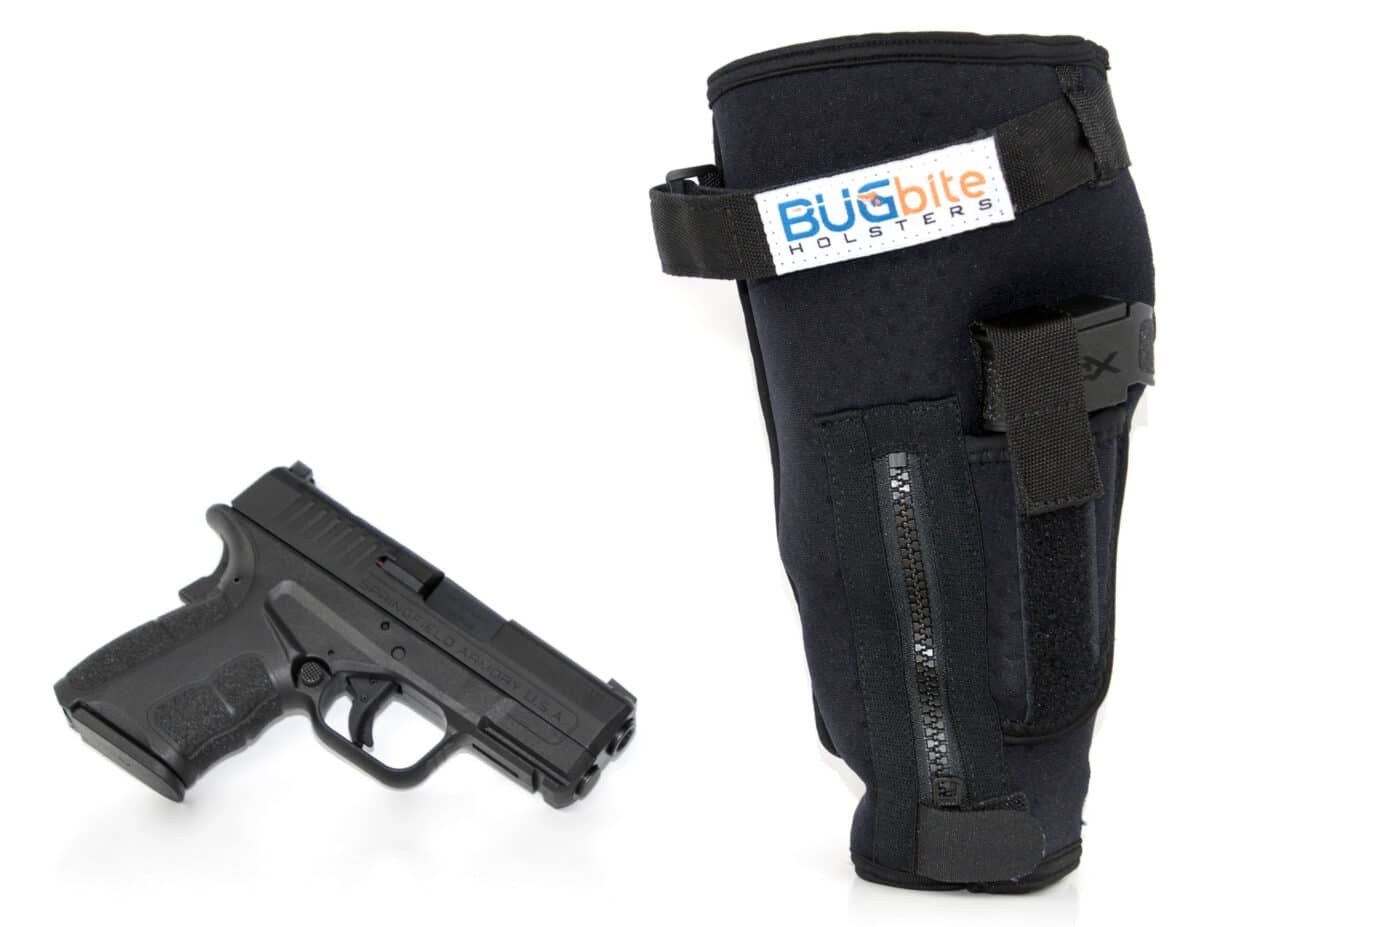 testing the Bugbite holster with a Springfield XD-S